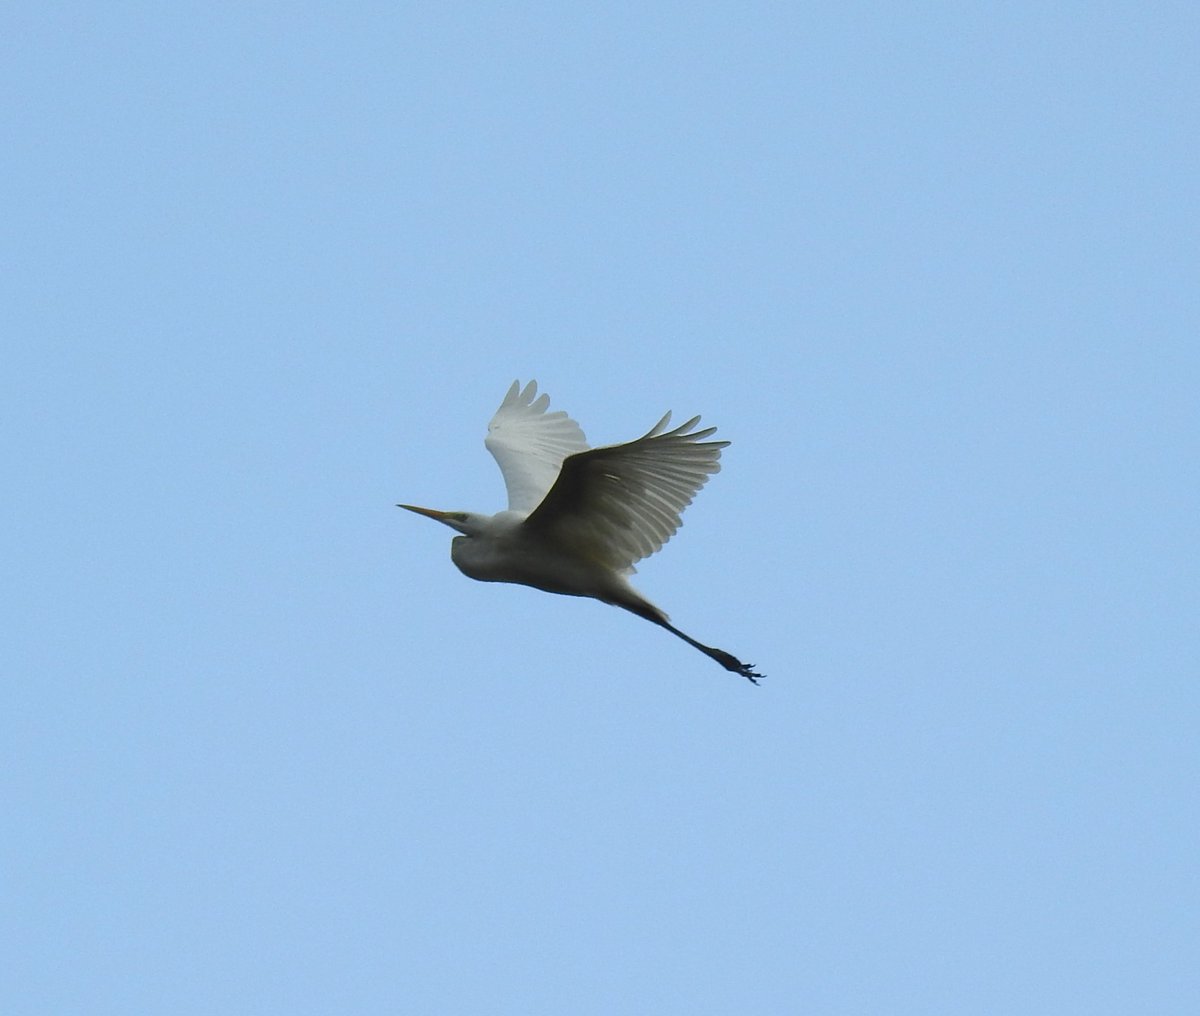 GWE flew north over #ChardRes at 09:30 this morning. Possibly a different bird from the one seen here on the 11th present for just the day. @somersetbirds